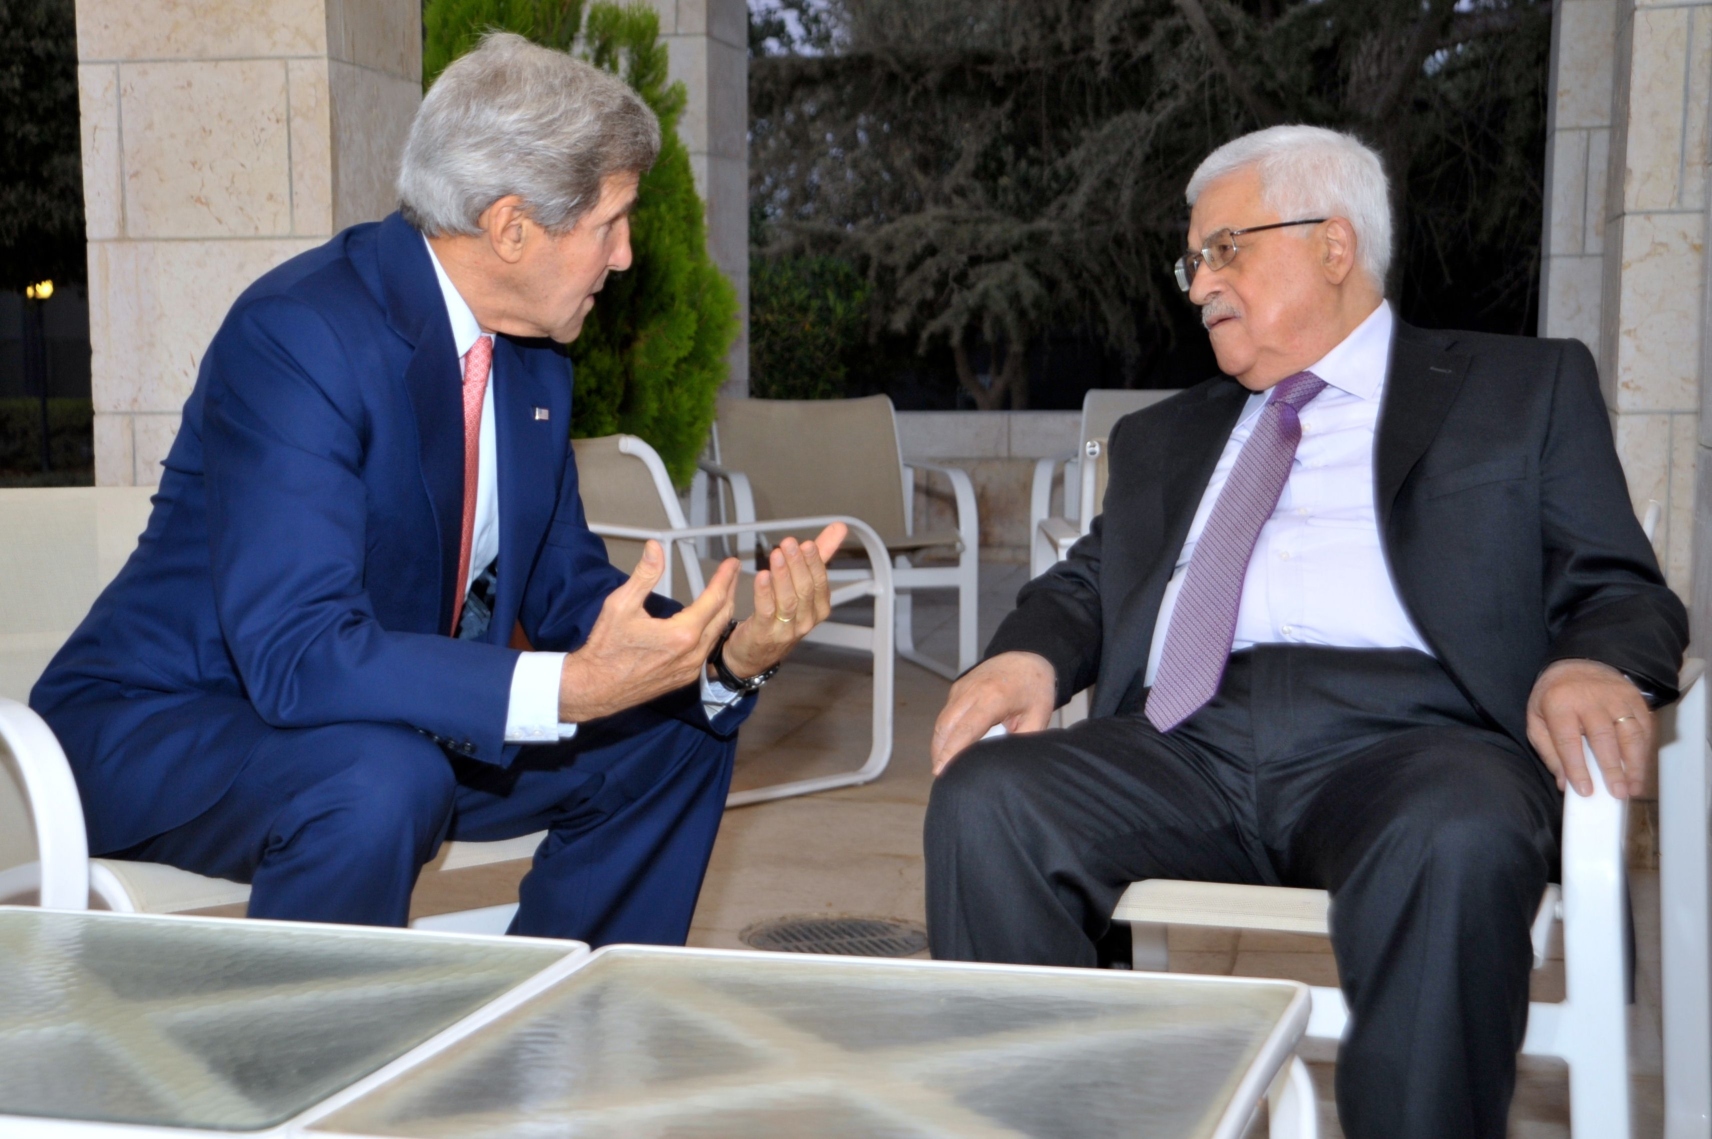 This US State Department photo shows US Secretary of State John Kerry(L) as he sits with Palestinian Authority President Mahmoud Abbas before they meet and share a Iftar dinner during Ramadan in Amman, Jordan. Photo: AFP